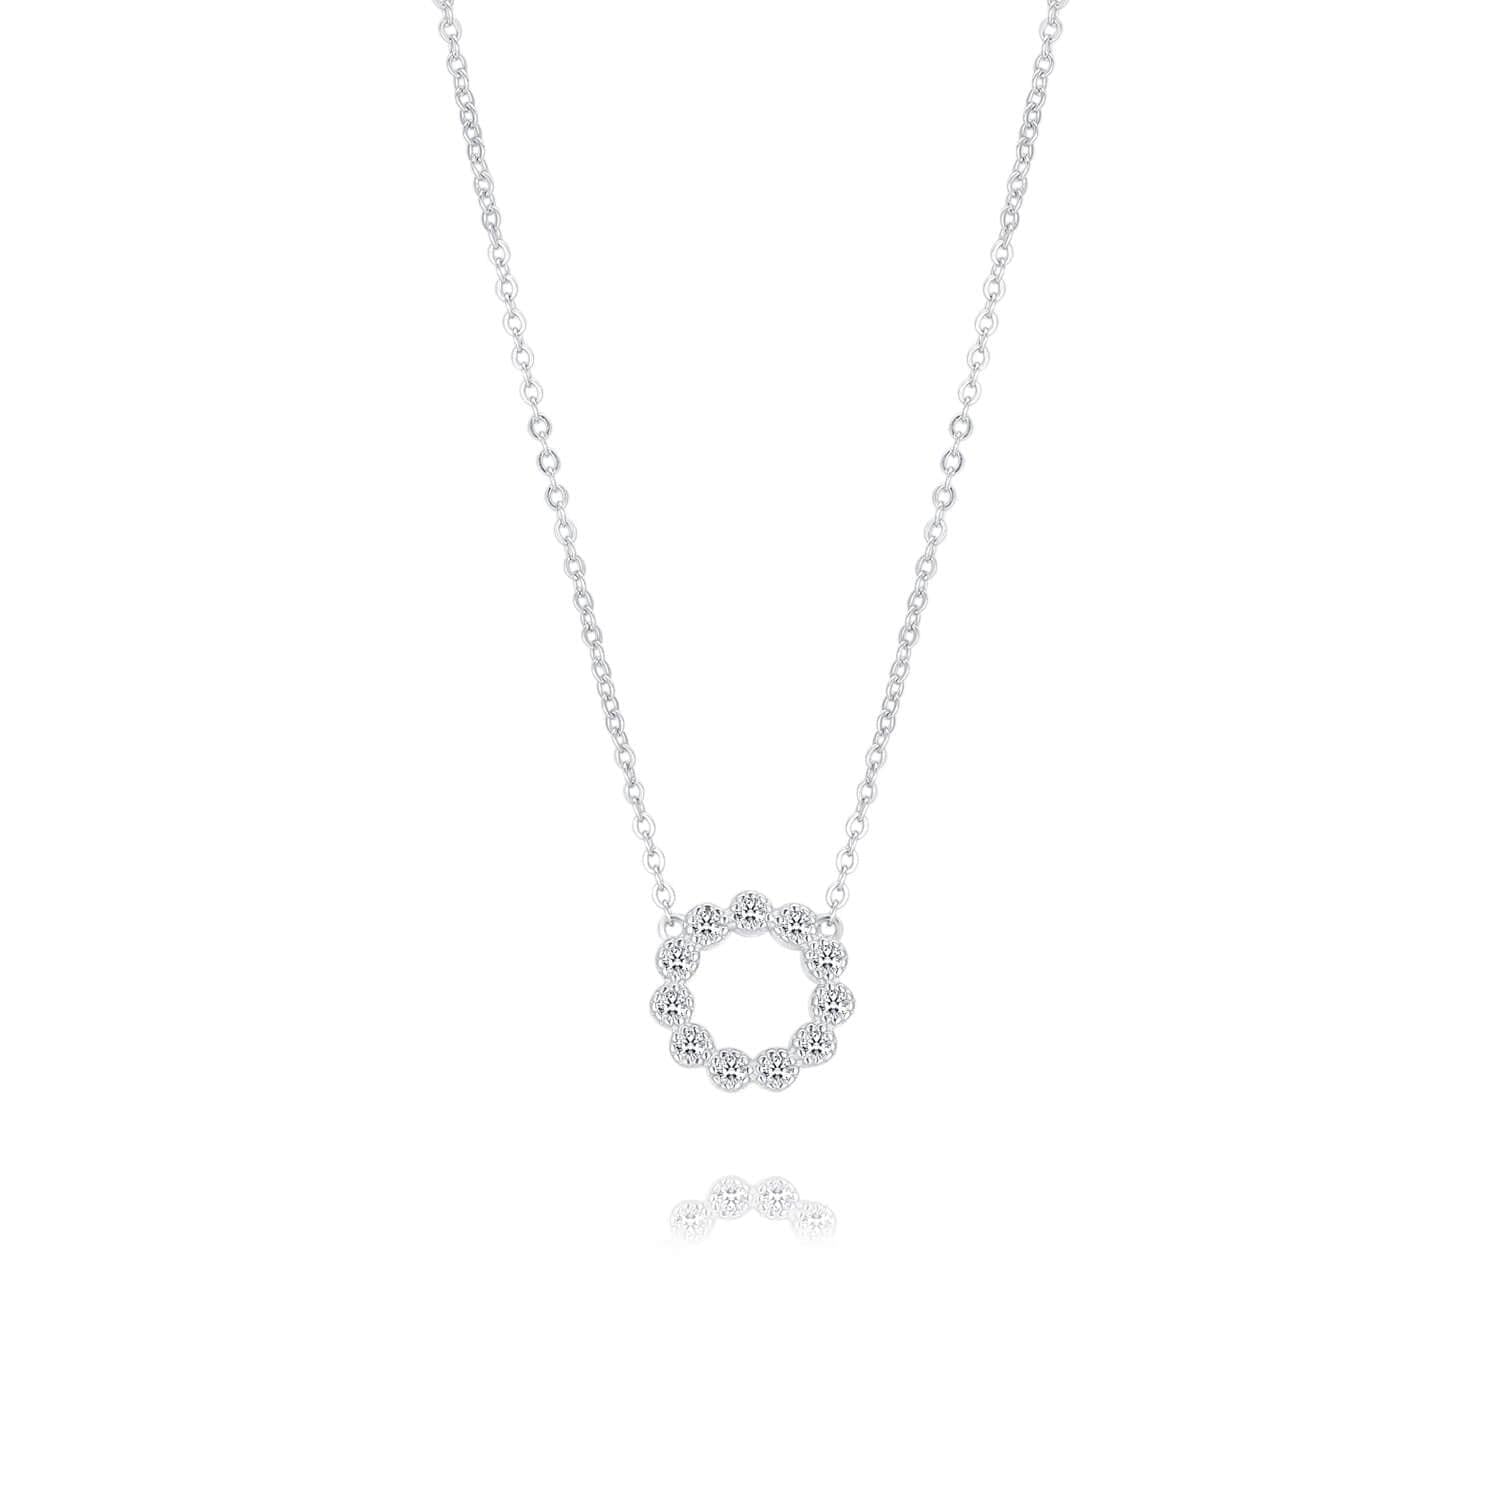 Open Circles Necklace with Tiny & Small Circles in Sterling Silver – PINCH